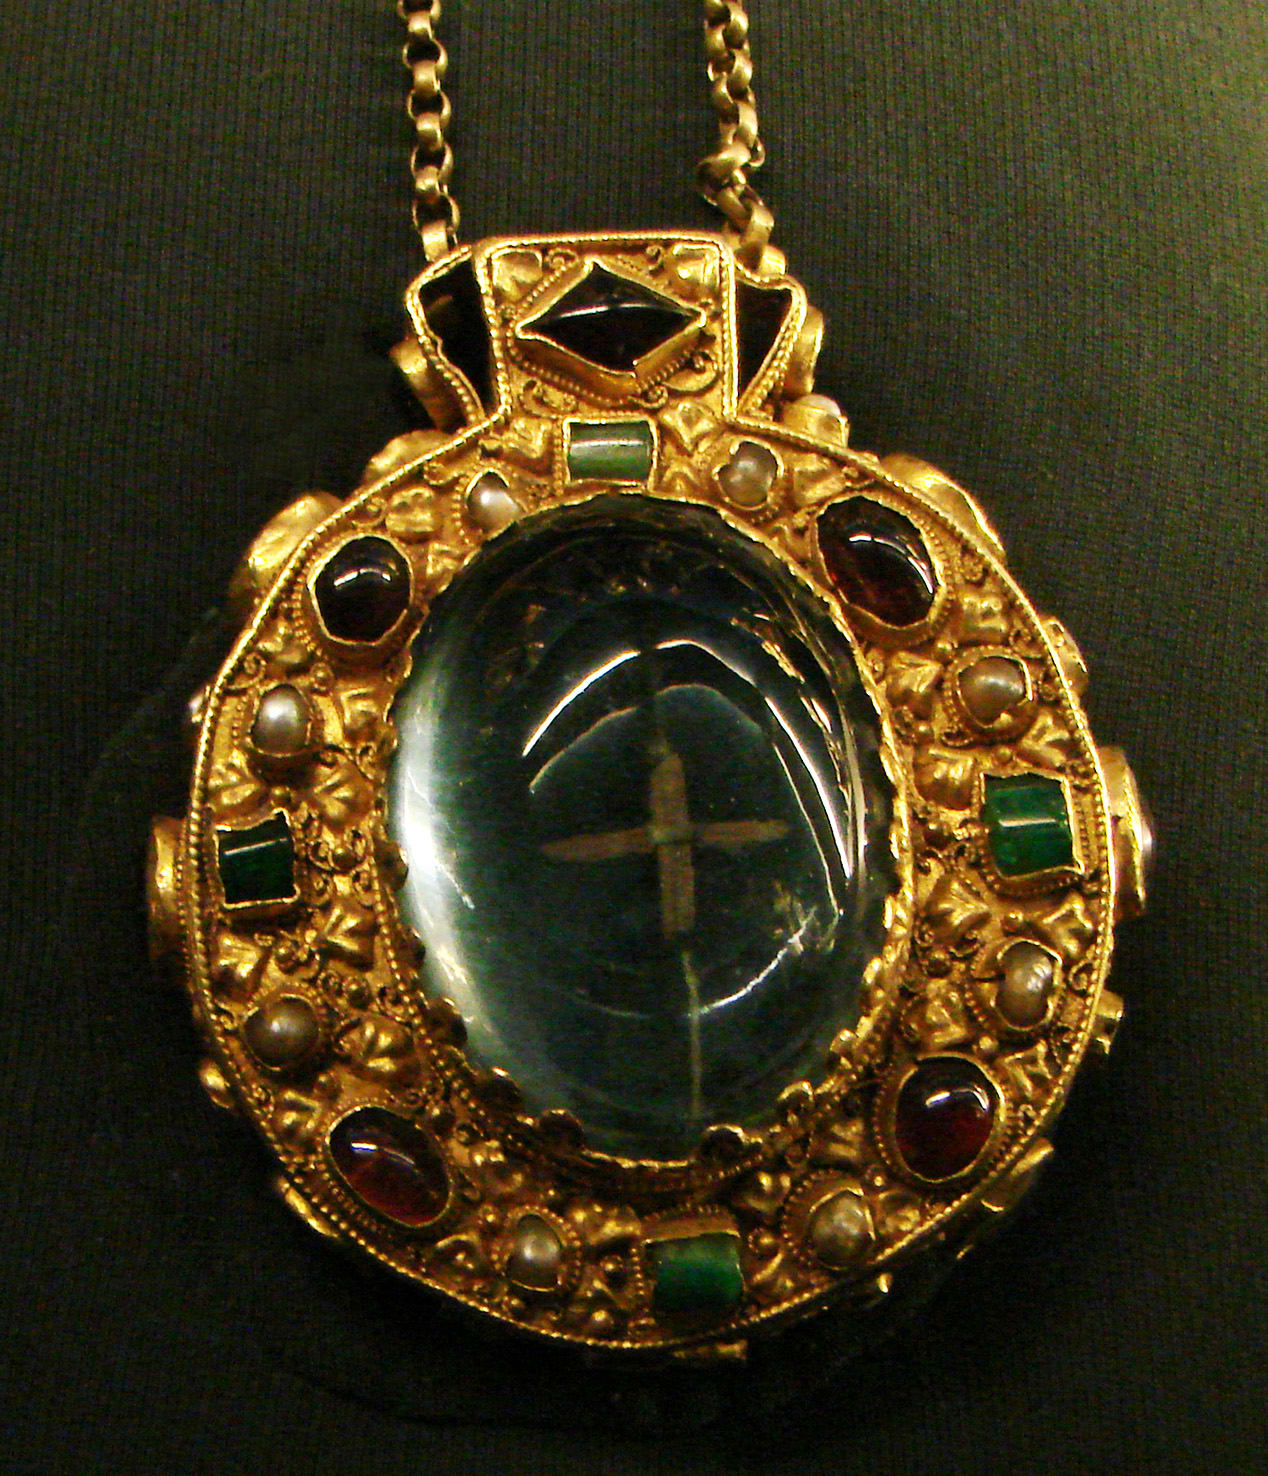 This golden talisman was buried with Charlemagne, King of the Franks, at Aix-la-Chapelle in 814. It has two large cabochon sapphires, set over wood remnants of the Holy Cross. It was removed to the Cathedral in 1000 and later worn by the Empress Josephine in 1804.